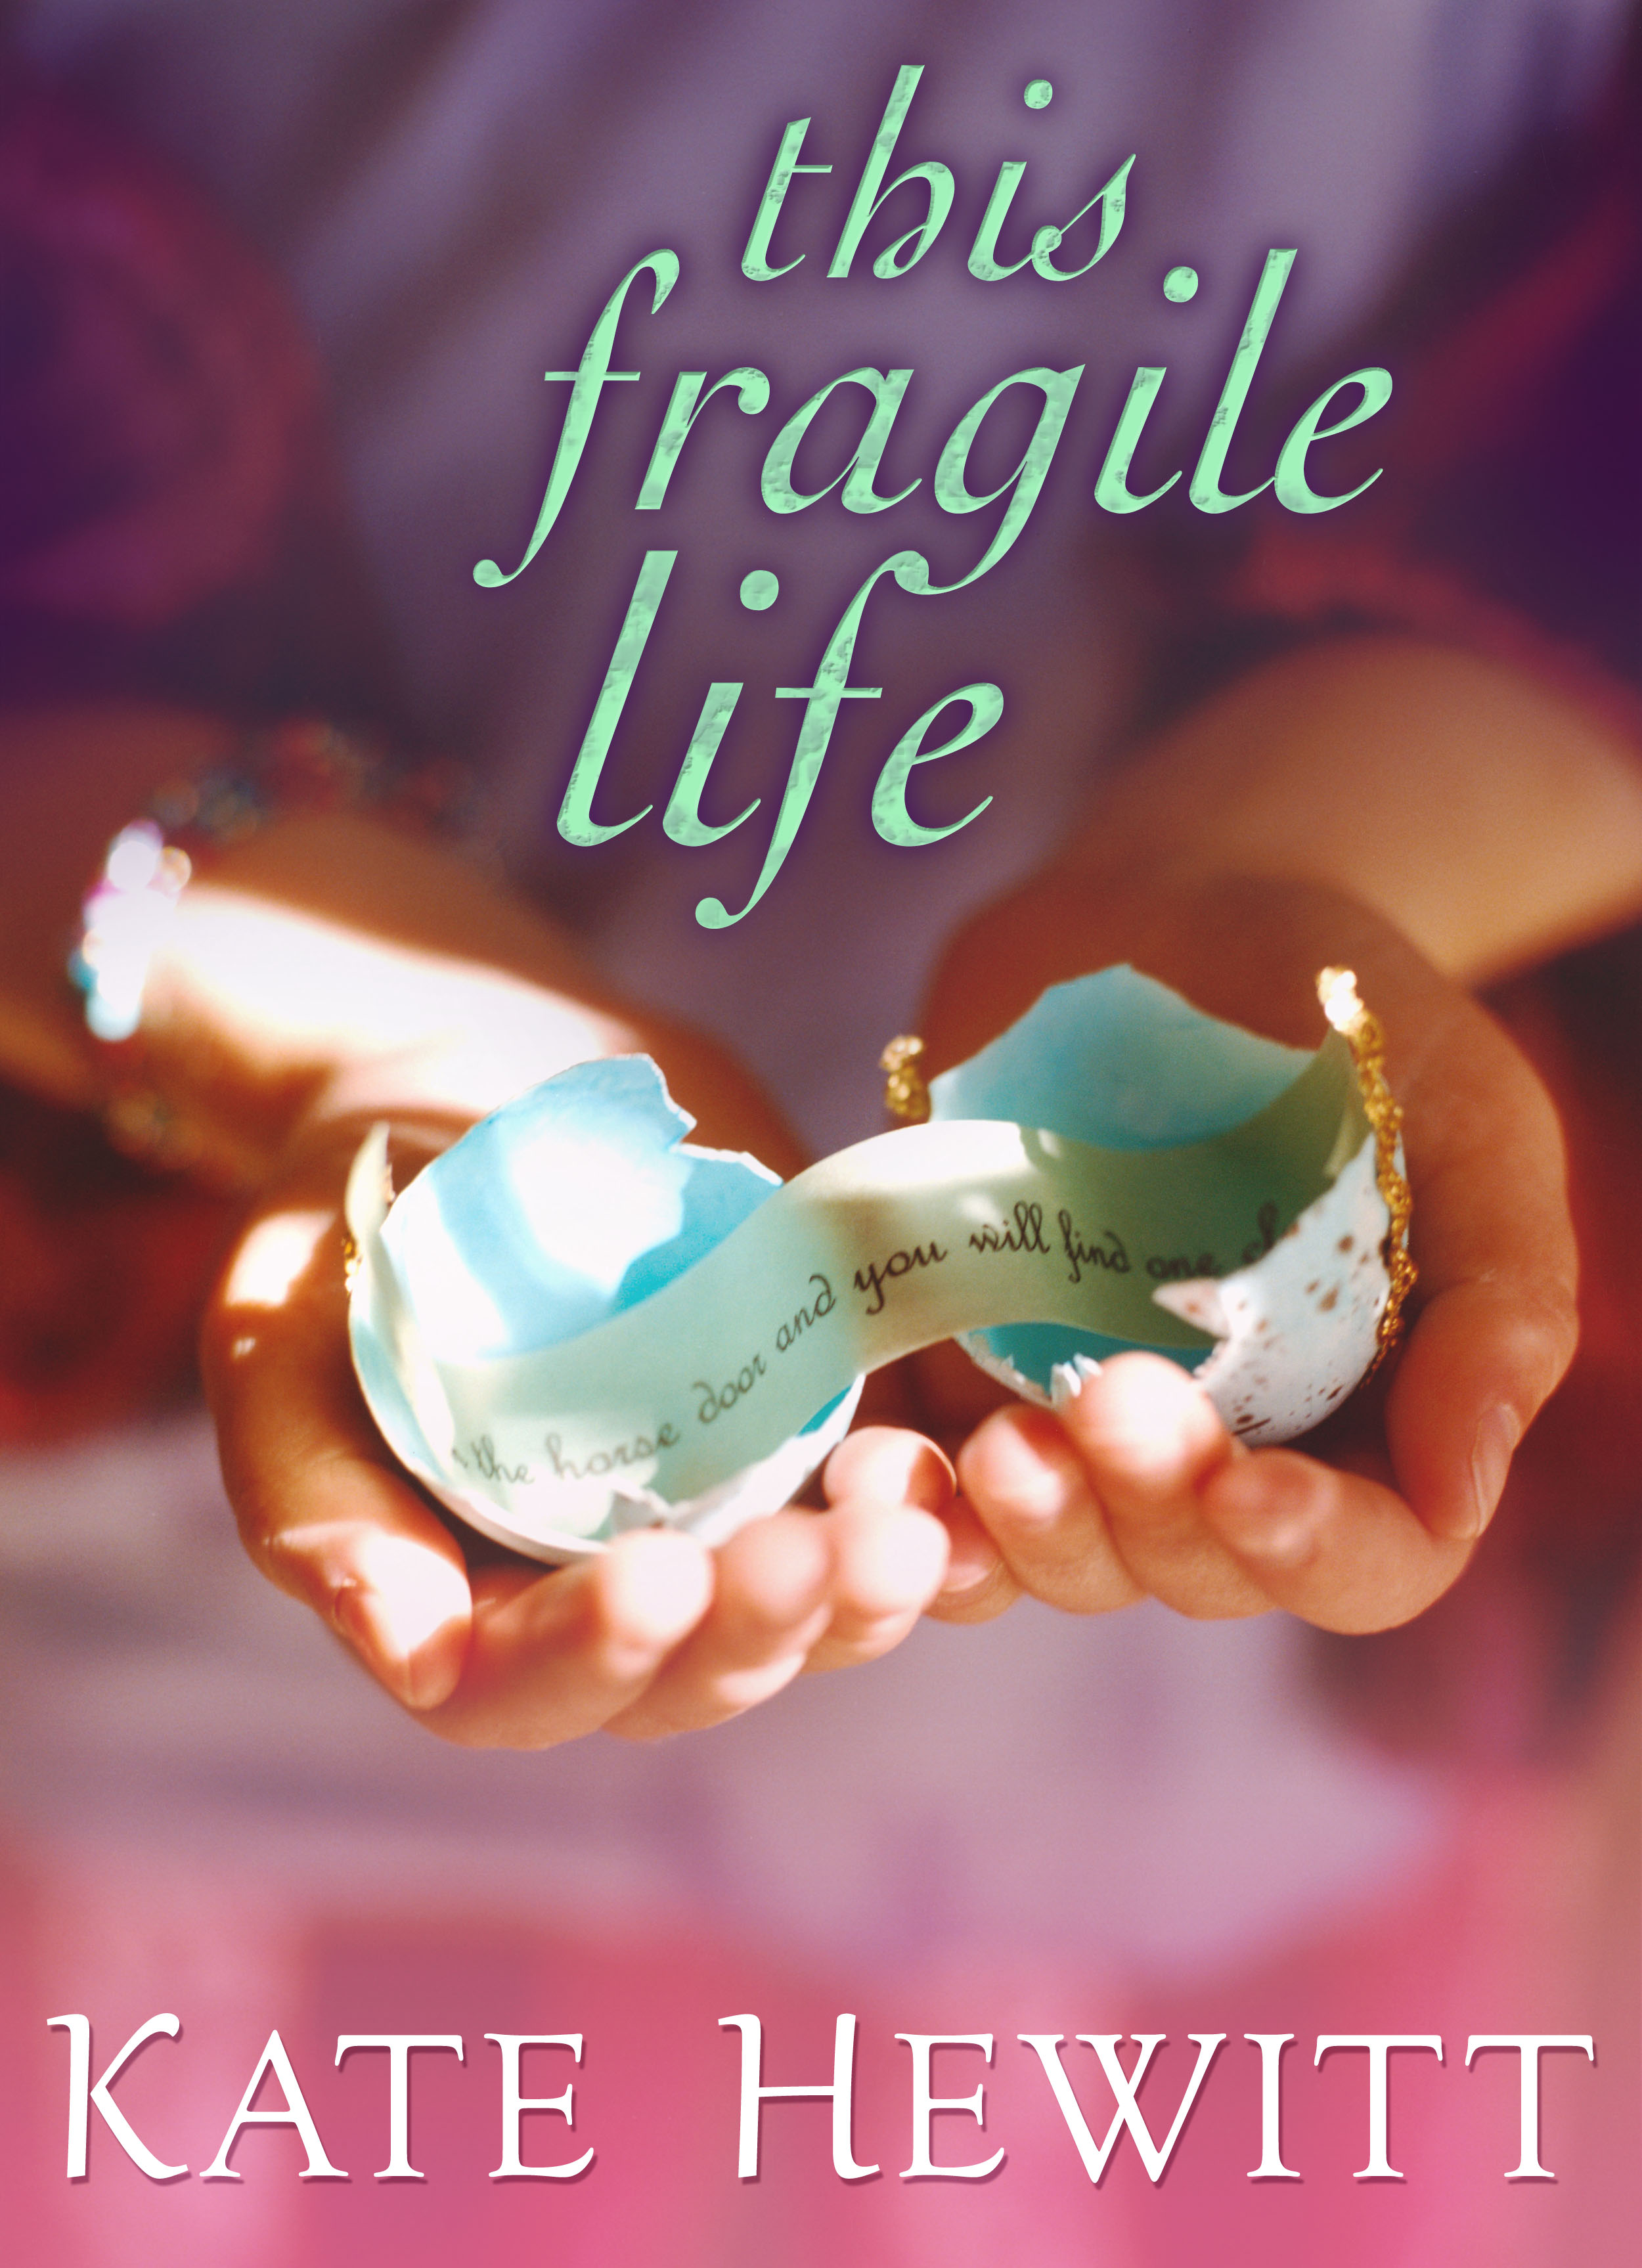 This Fragile Life